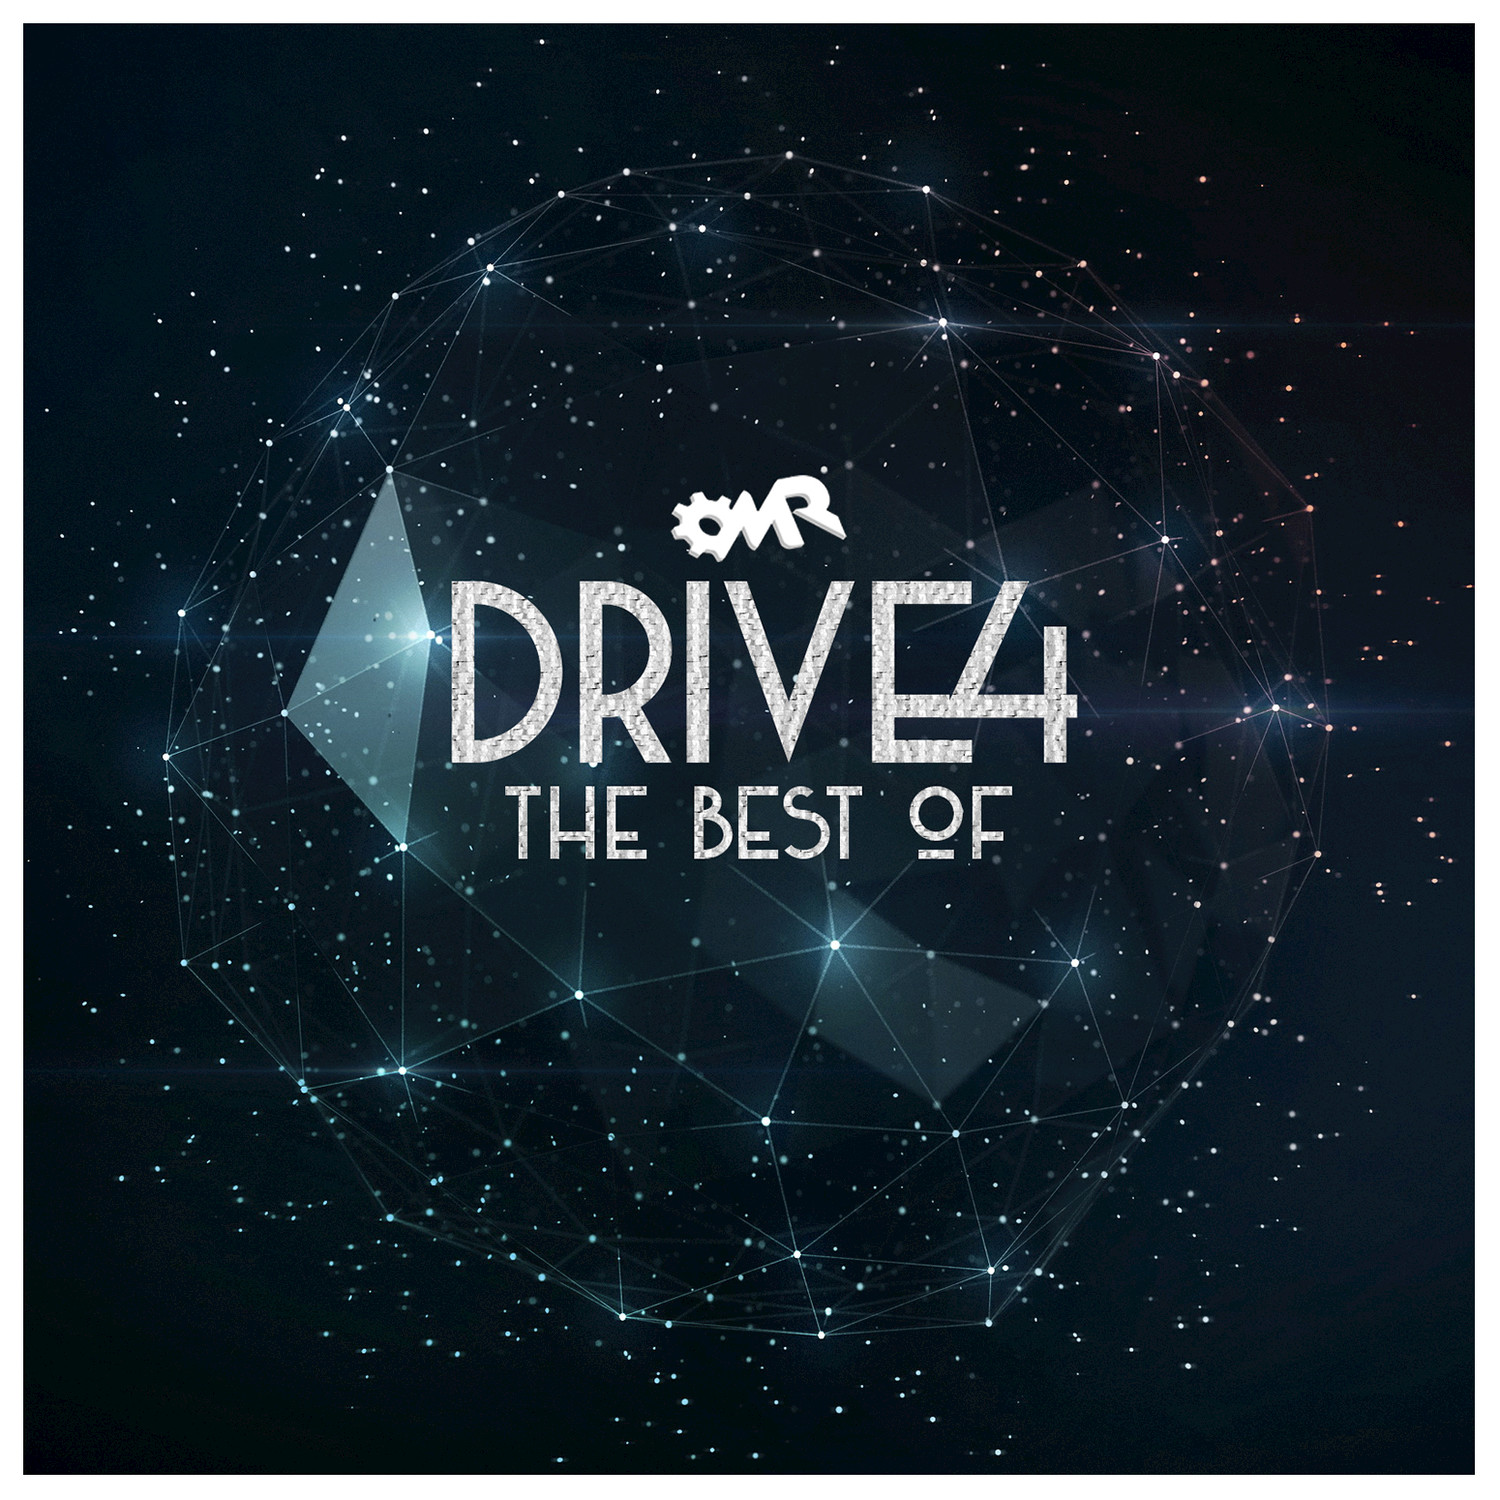 Drive 4: The Best Of